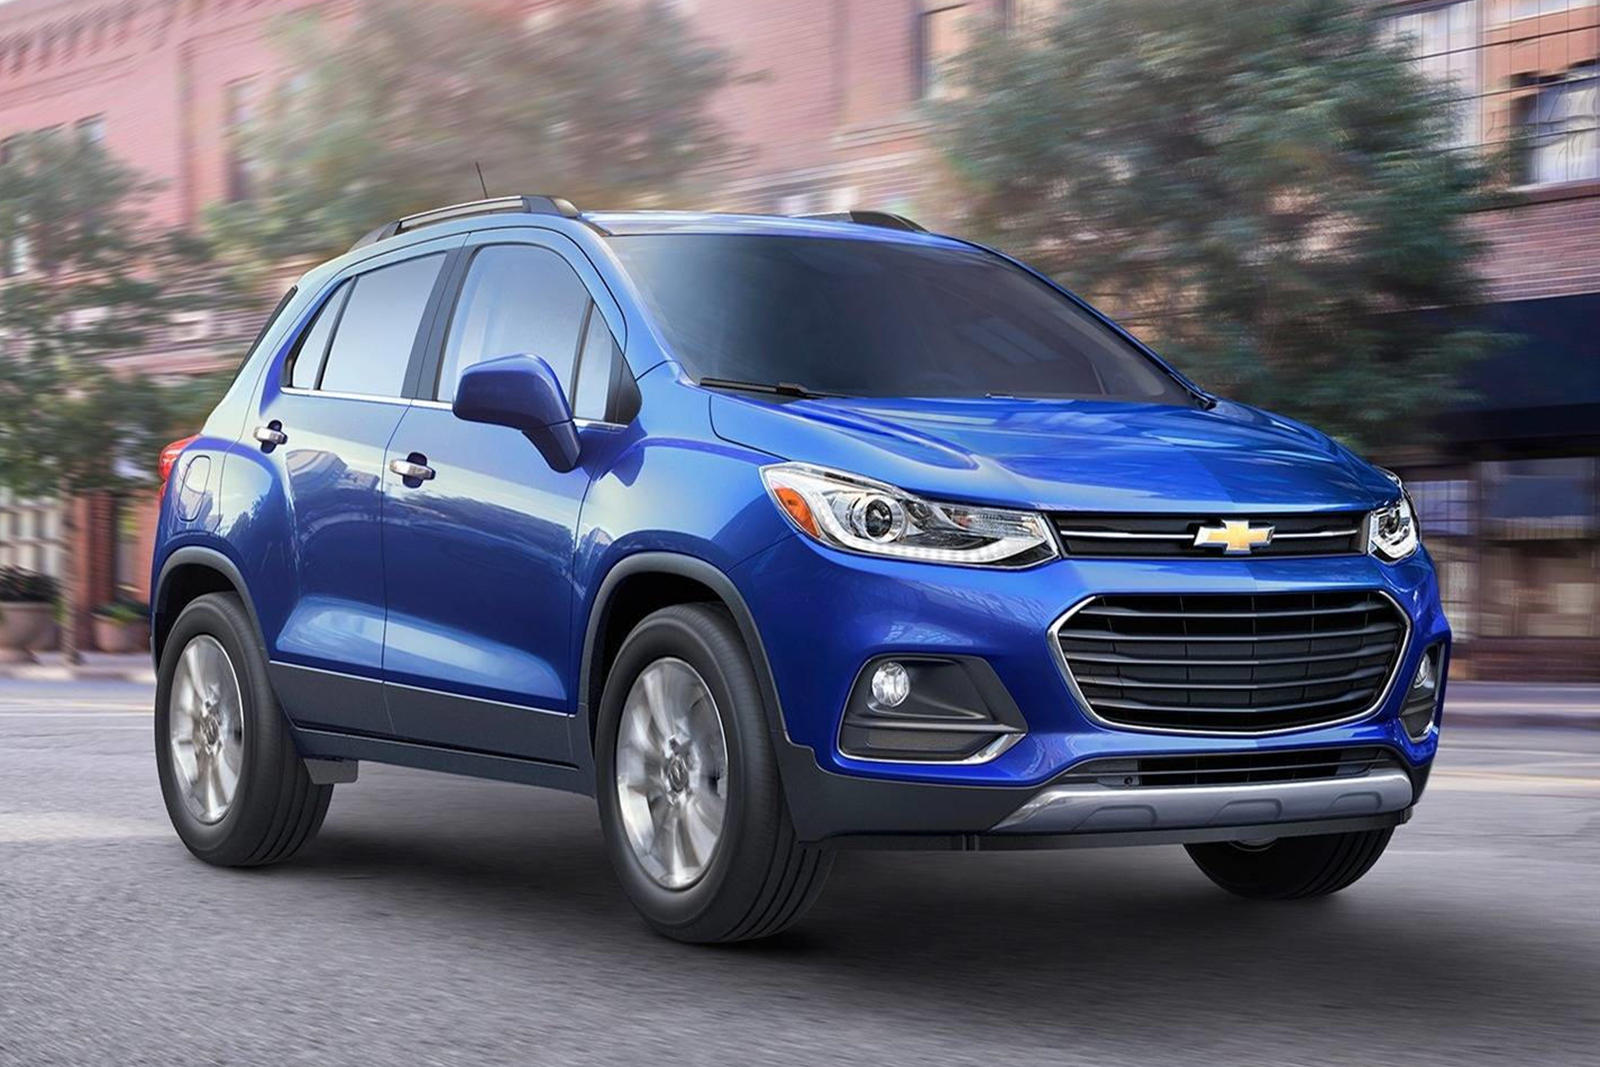 2019 Chevrolet Trax Front View Driving